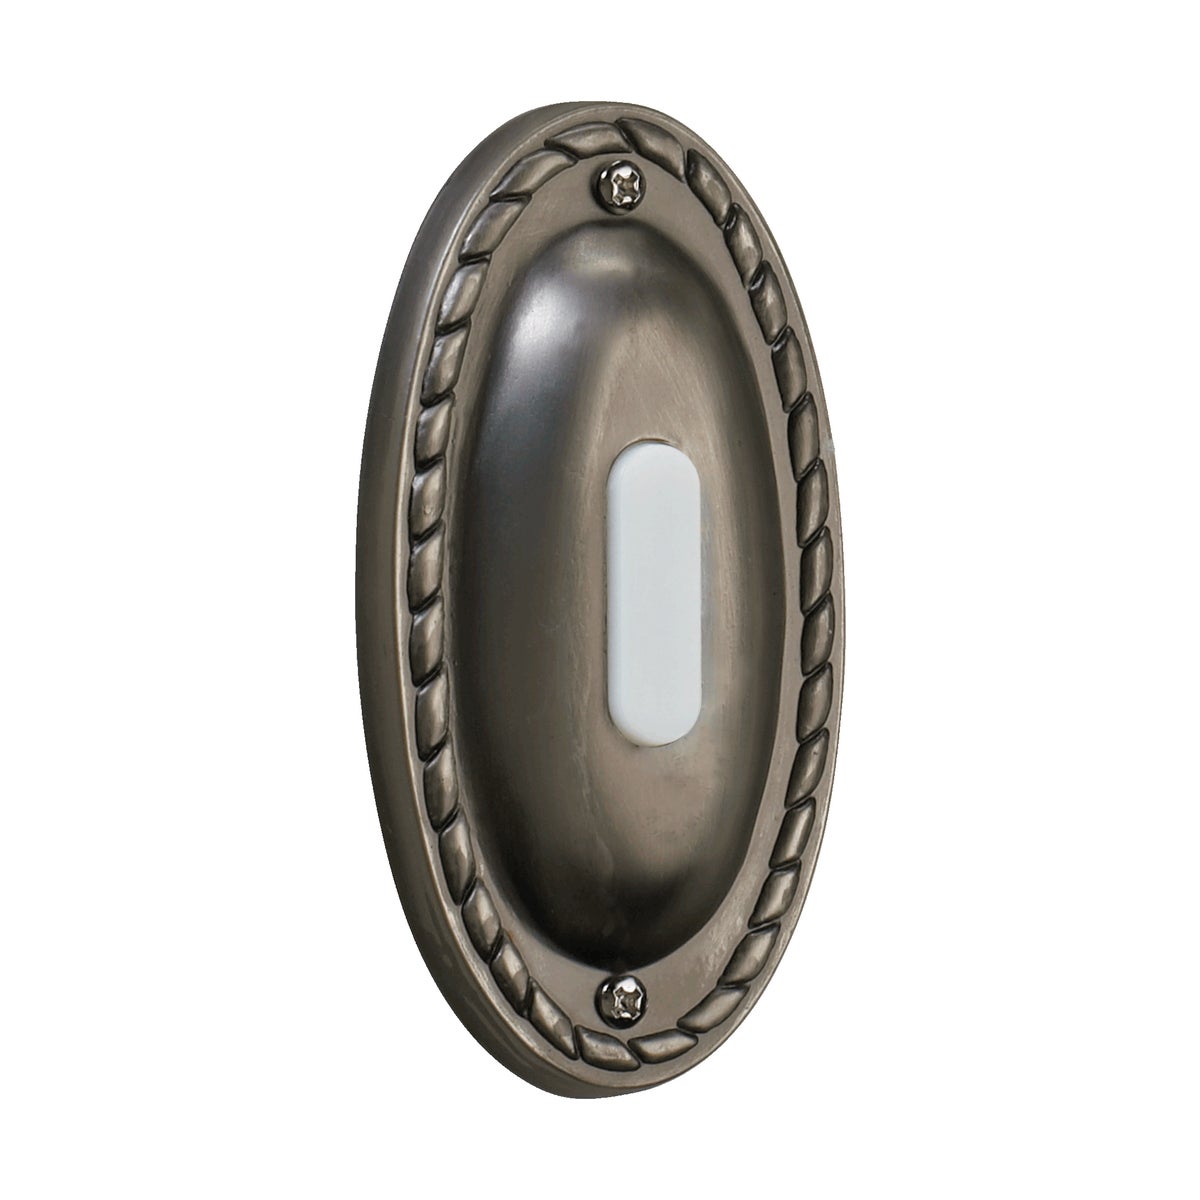 TRADITIONAL OVAL BTN - Antique Silver